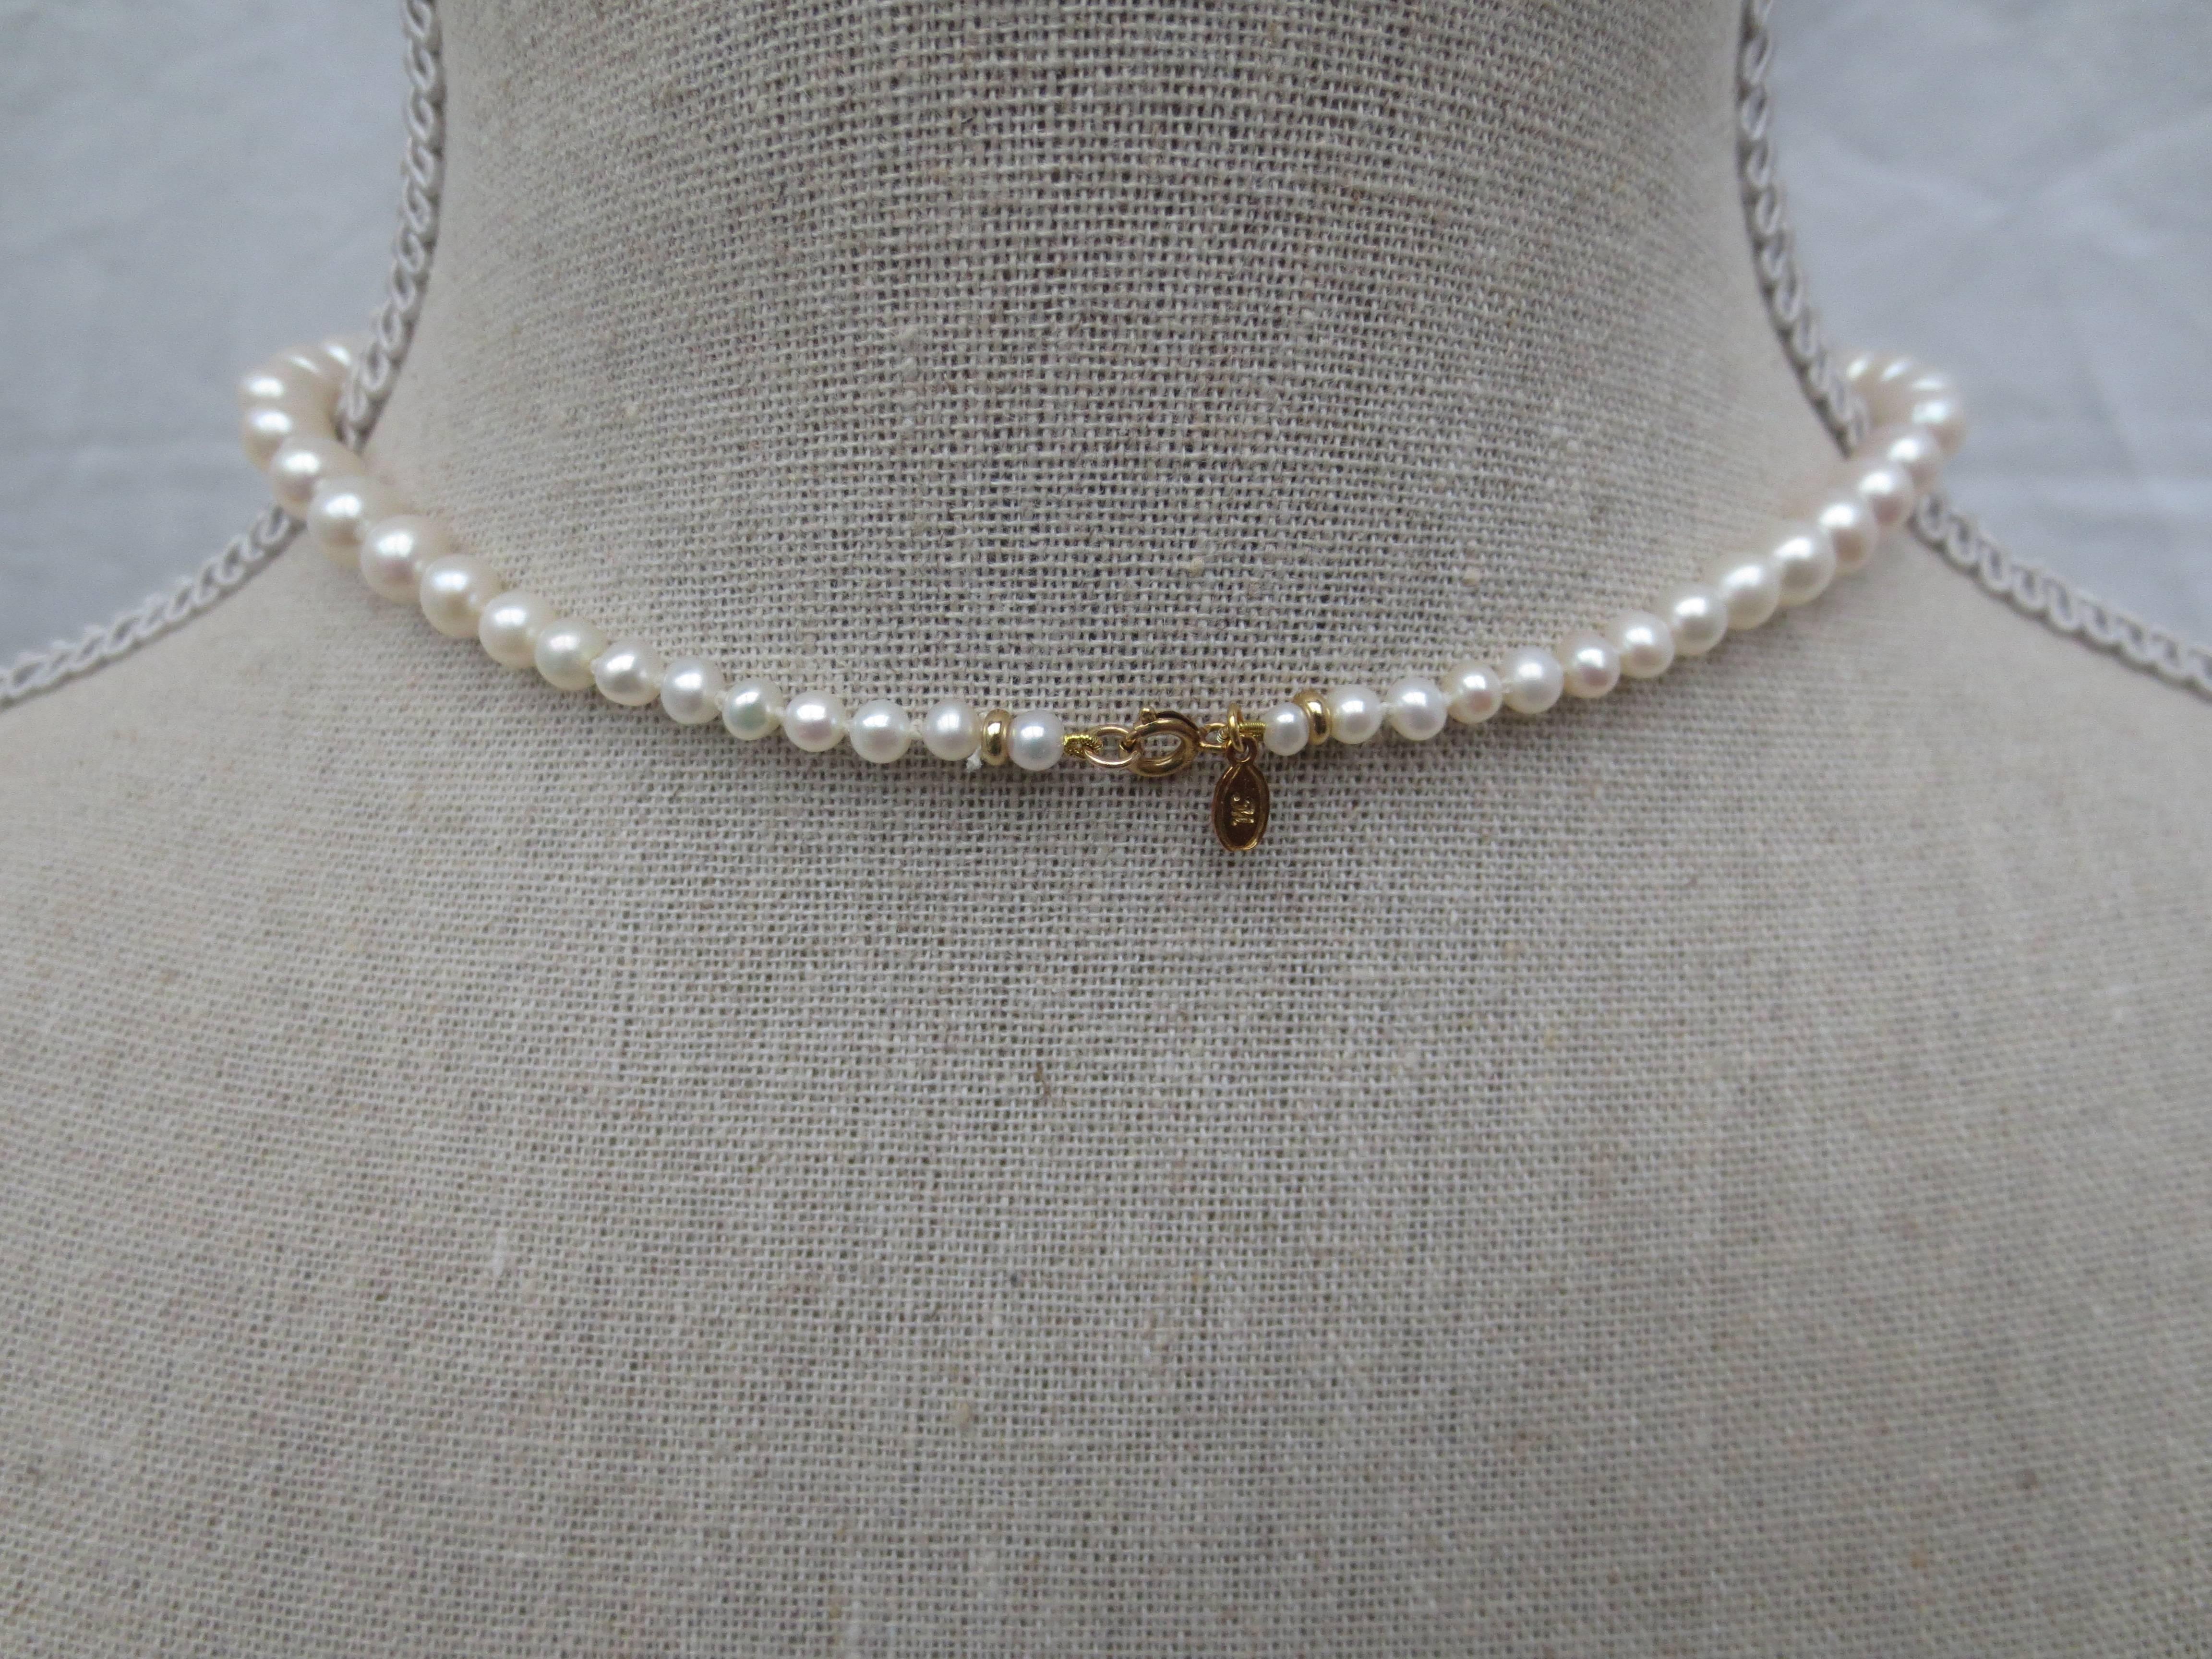 Bead Marina J Pearl Necklace with Baroque Pearl Centerpiece & 14k Gold Clasp For Sale